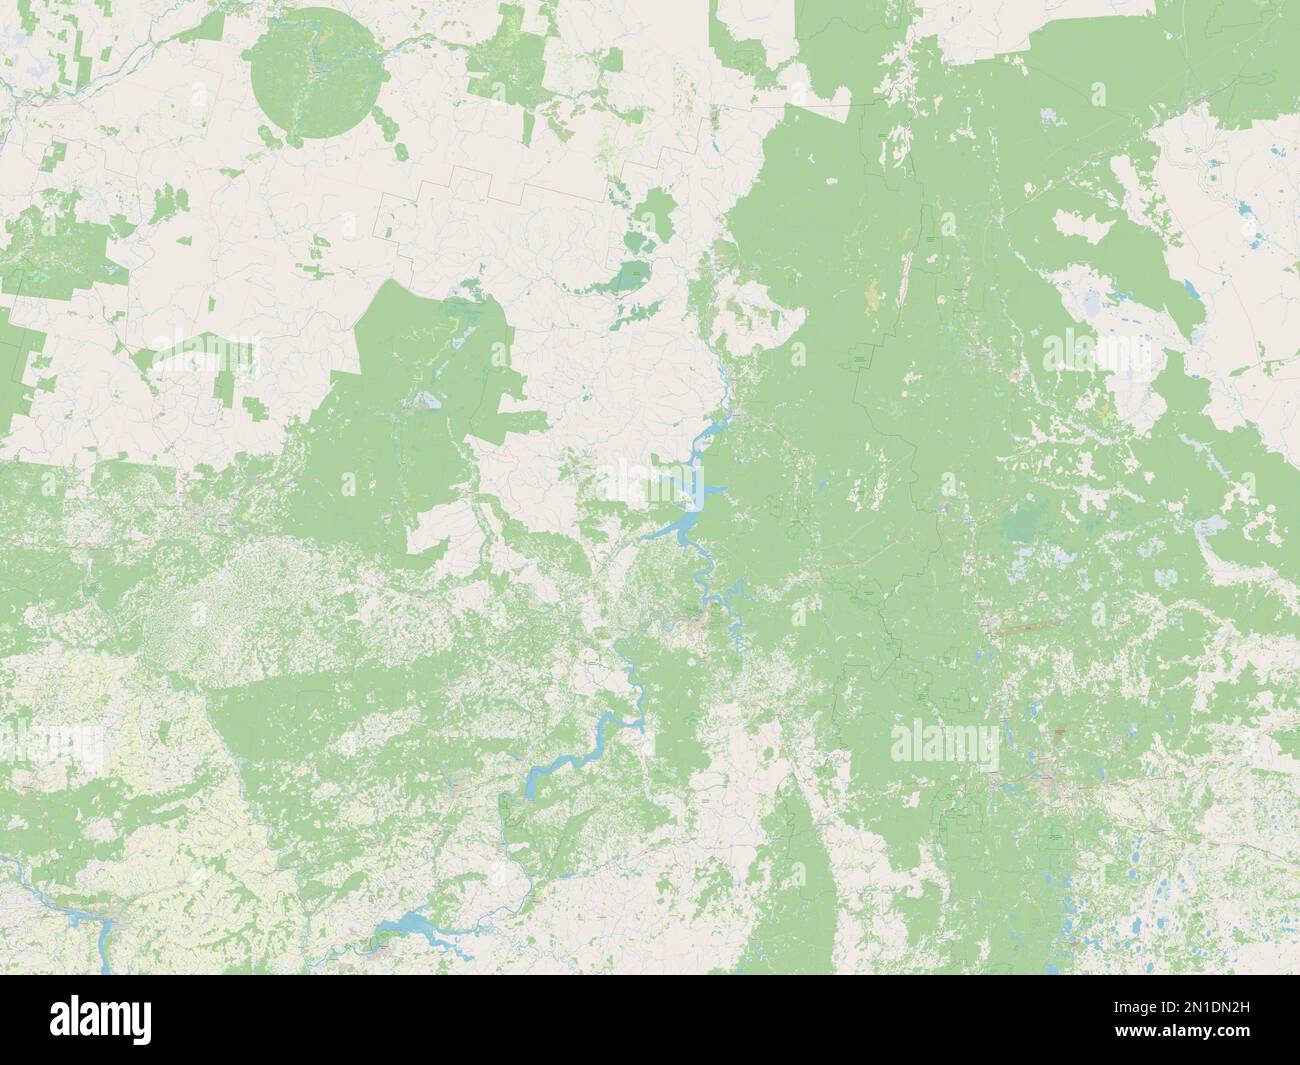 Perm', territory of Russia. Open Street Map Stock Photo